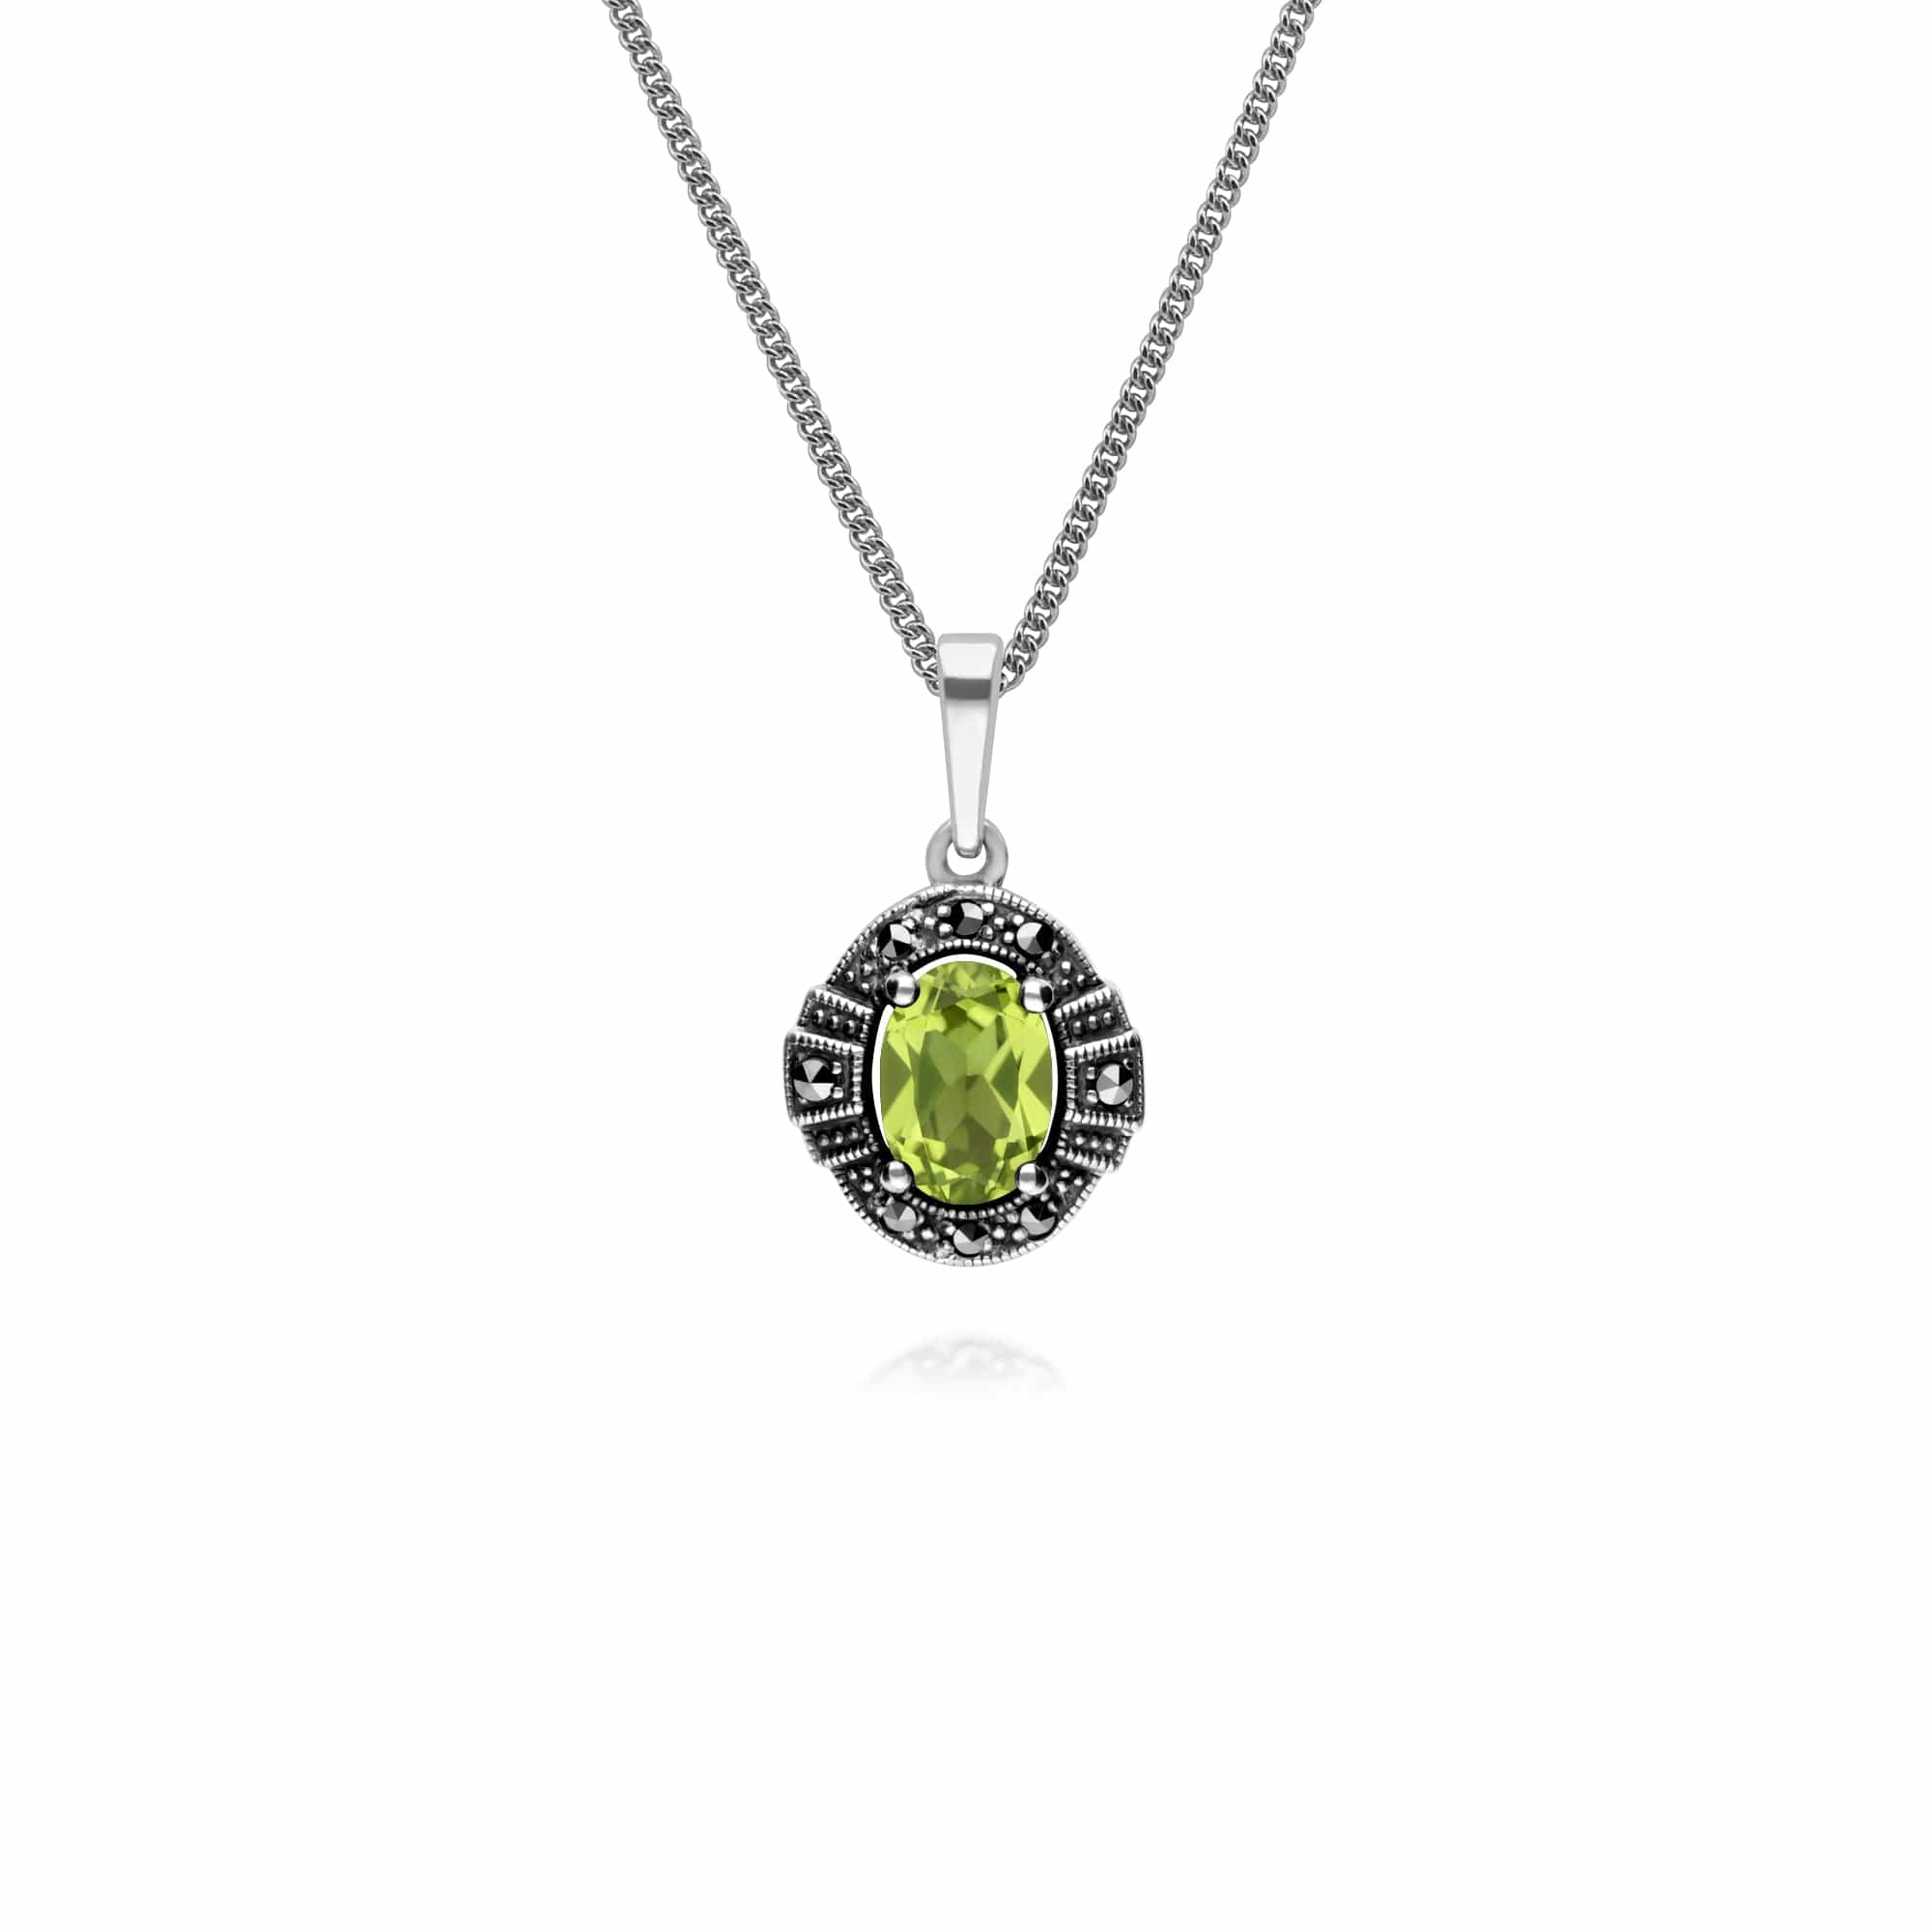 214P303304925-214L165404925 Art Deco Style Oval Peridot and Marcasite Cluster Bracelet & Pendant Set in 925 Sterling Silver 3